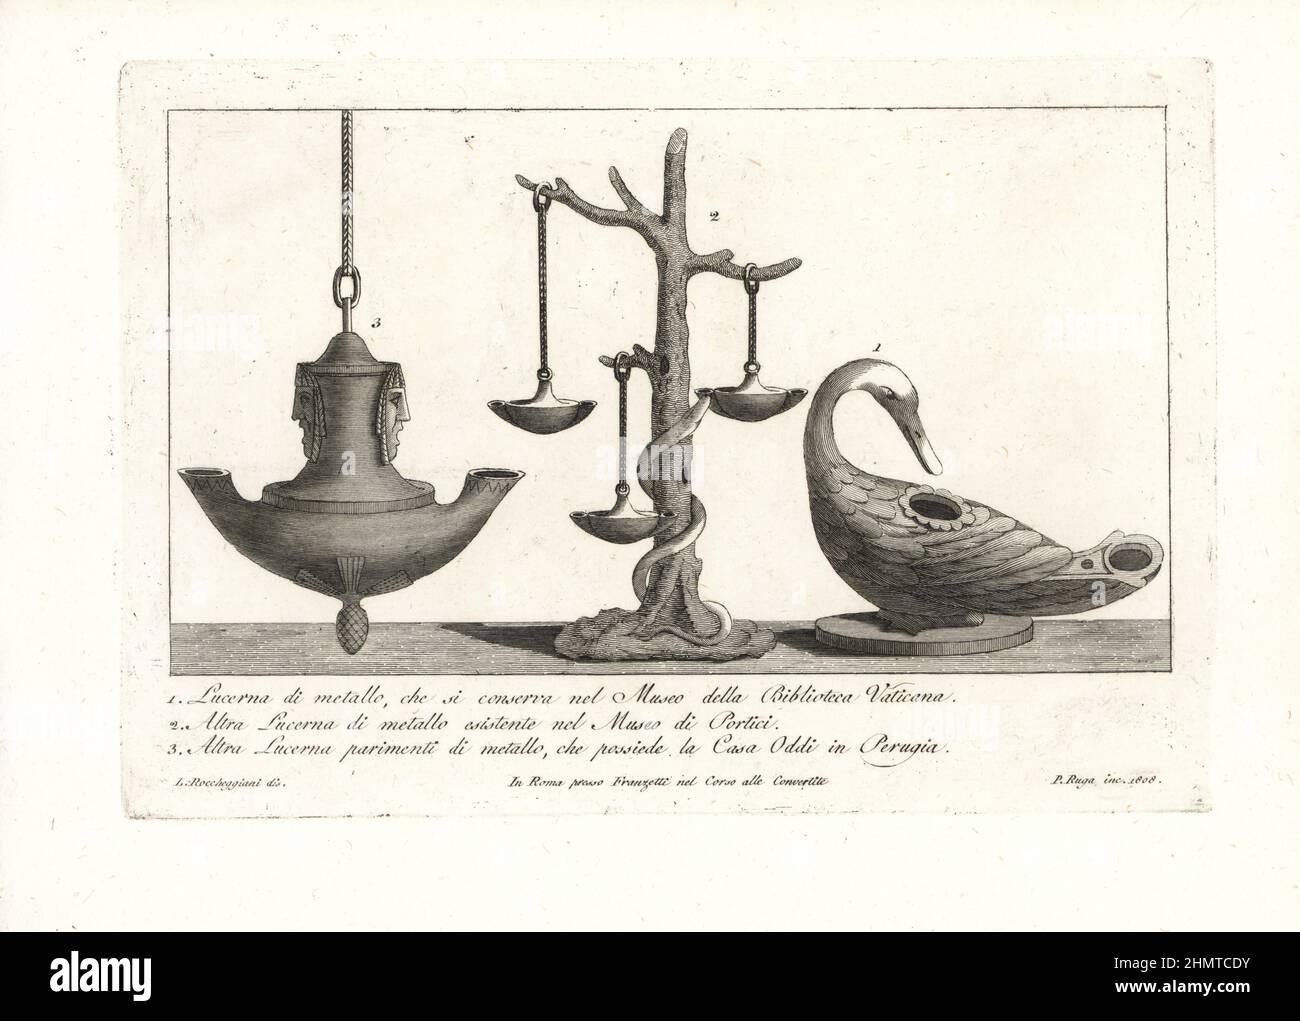 Metal lamp with theatrical masks from the museum of the Vatican Library  1, metal lamp with snake climbing a tree from the Museo di Portici 2, and metal lamp in the form of a swan from the Casa Oddi, Perugia 3. Copperplate engraving by Pietro Ruga after an illustration by Lorenzo Rocceggiani from his own 100 Plates of Costumes Religious, Civil and Military of the Ancient Egyptians, Etruscans, Greeks and Romans, Franzetti, Rome, 1802. Stock Photo